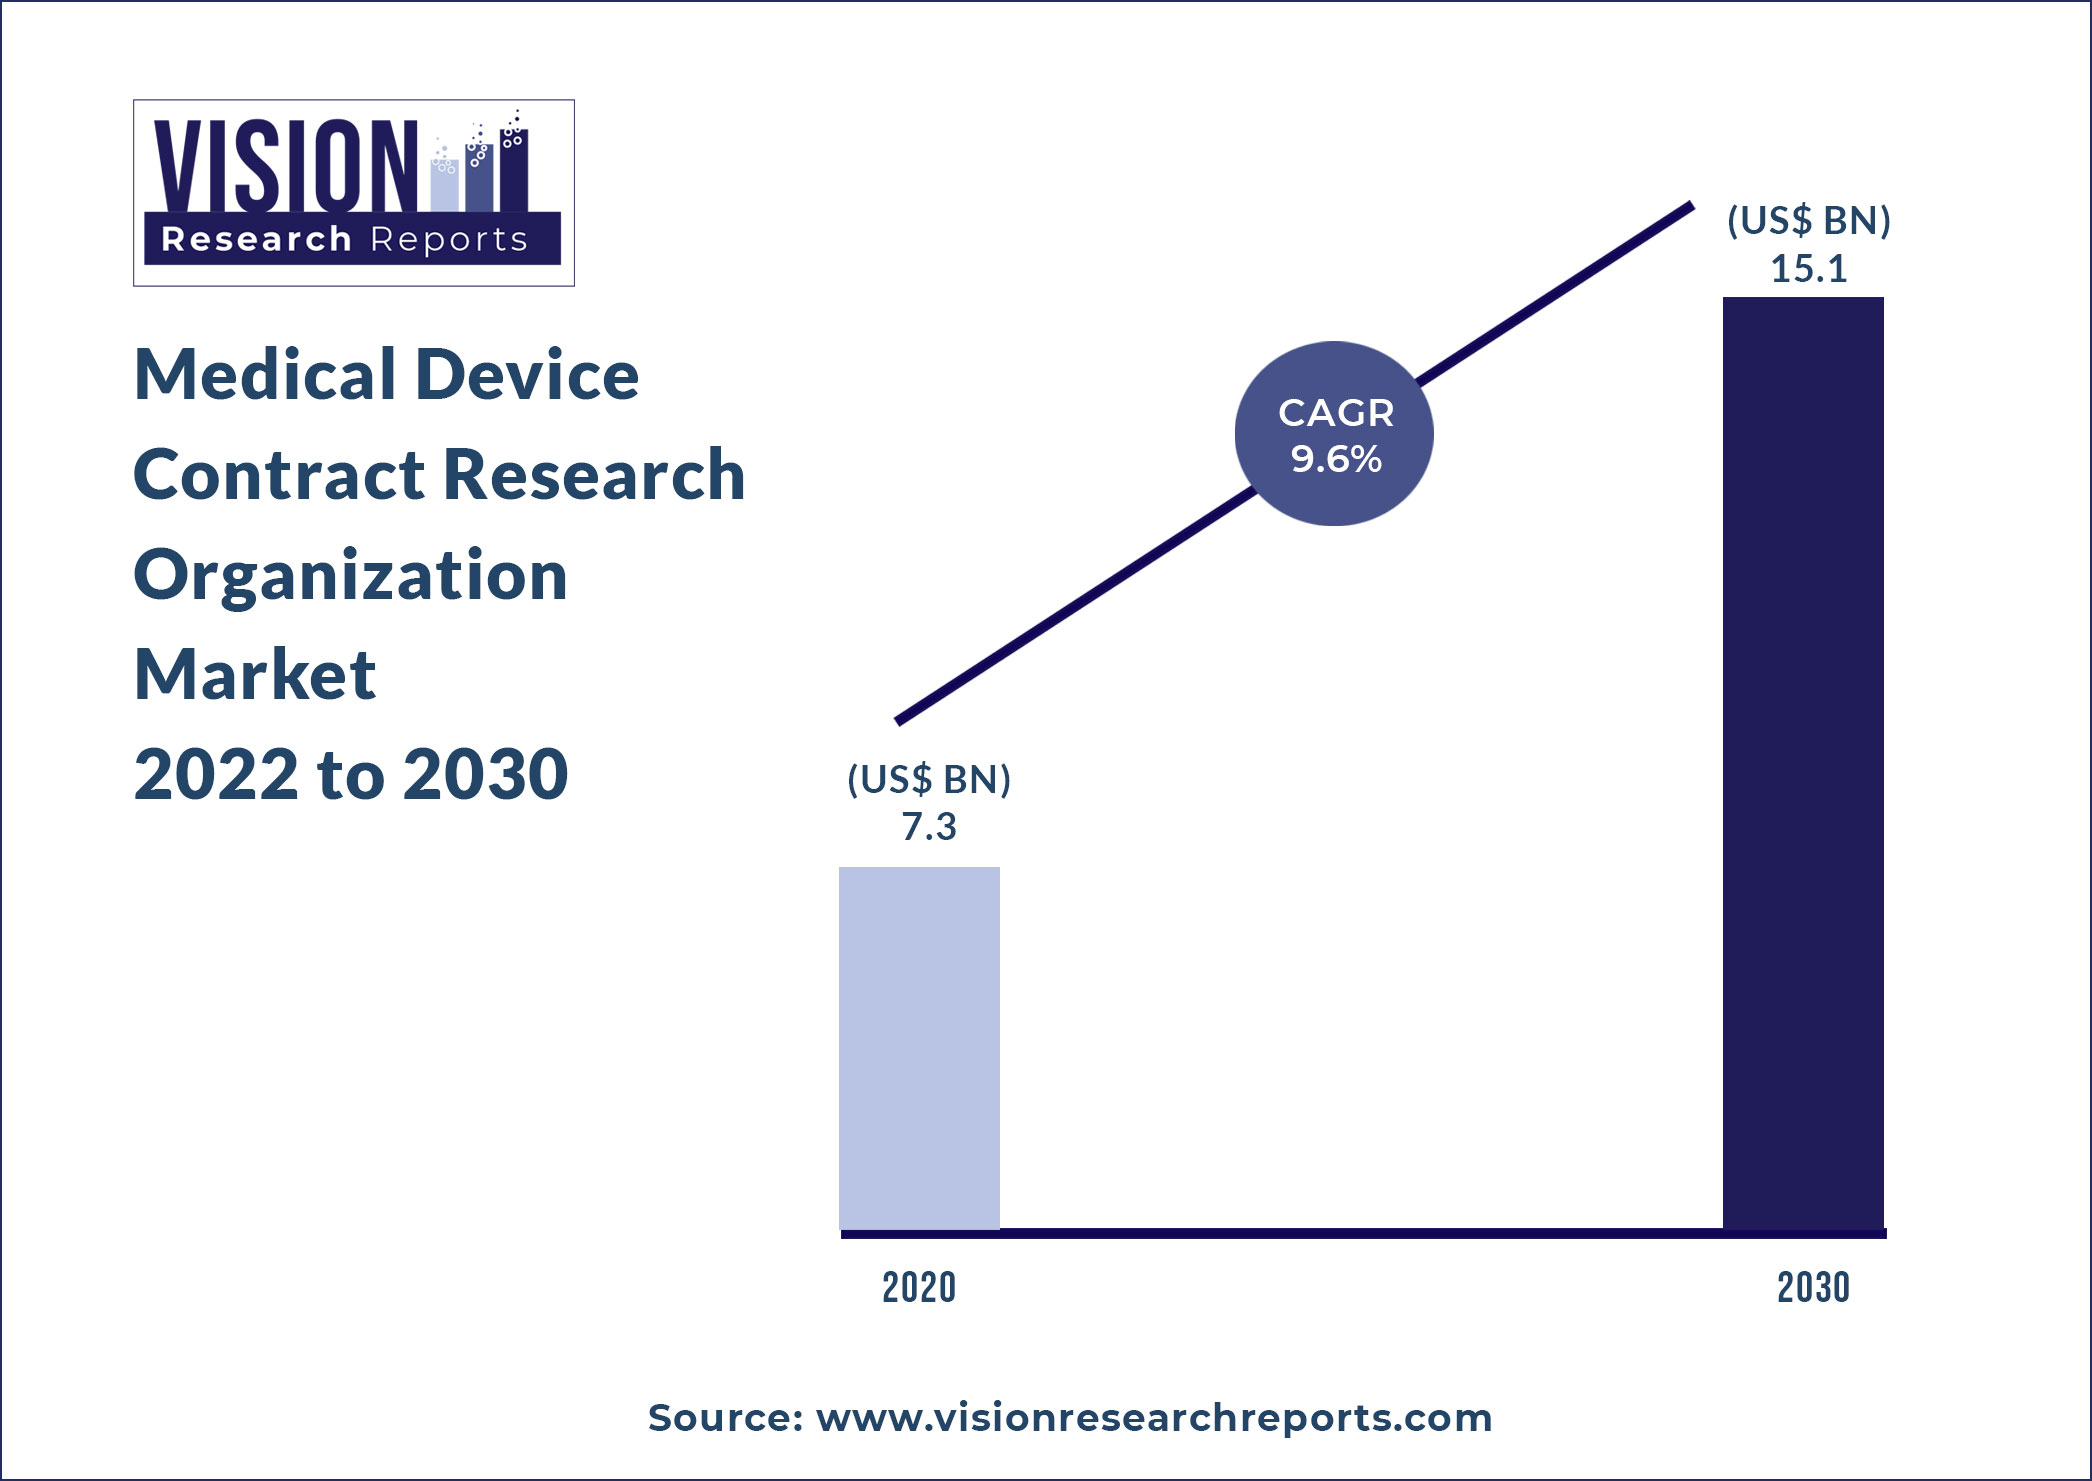 Medical Device Contract Research Organization Market Size 2022 to 2030